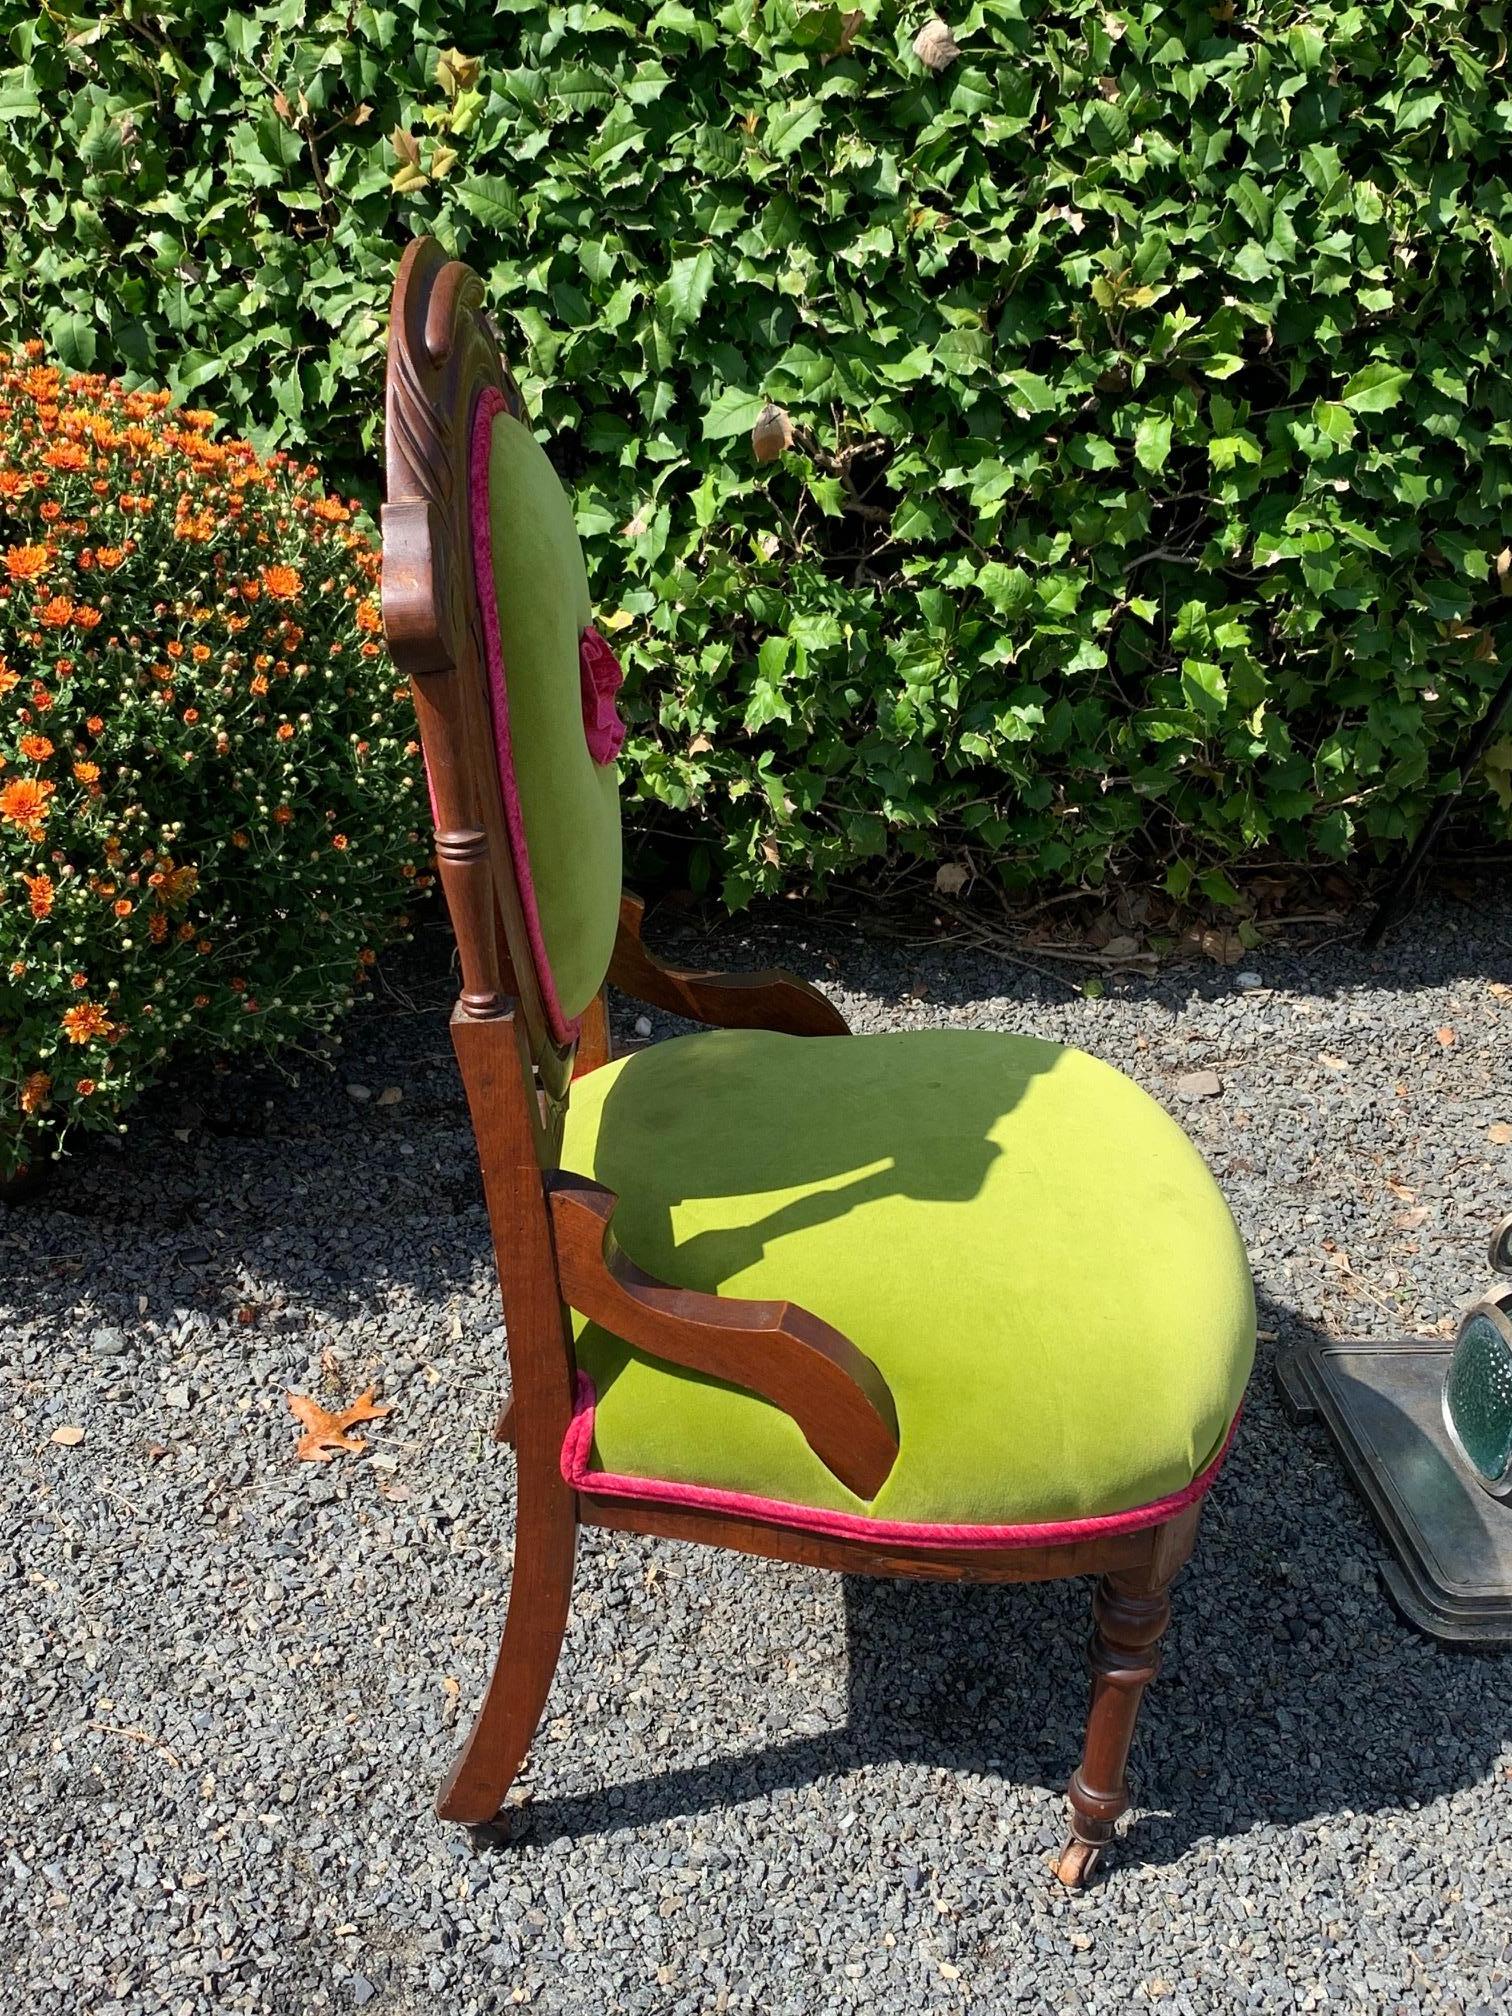 A stylish update of a carved wood Victorian chair upholstered imaginatively in bright chartreuse and magenta with a sassy little flower in the center of the back.